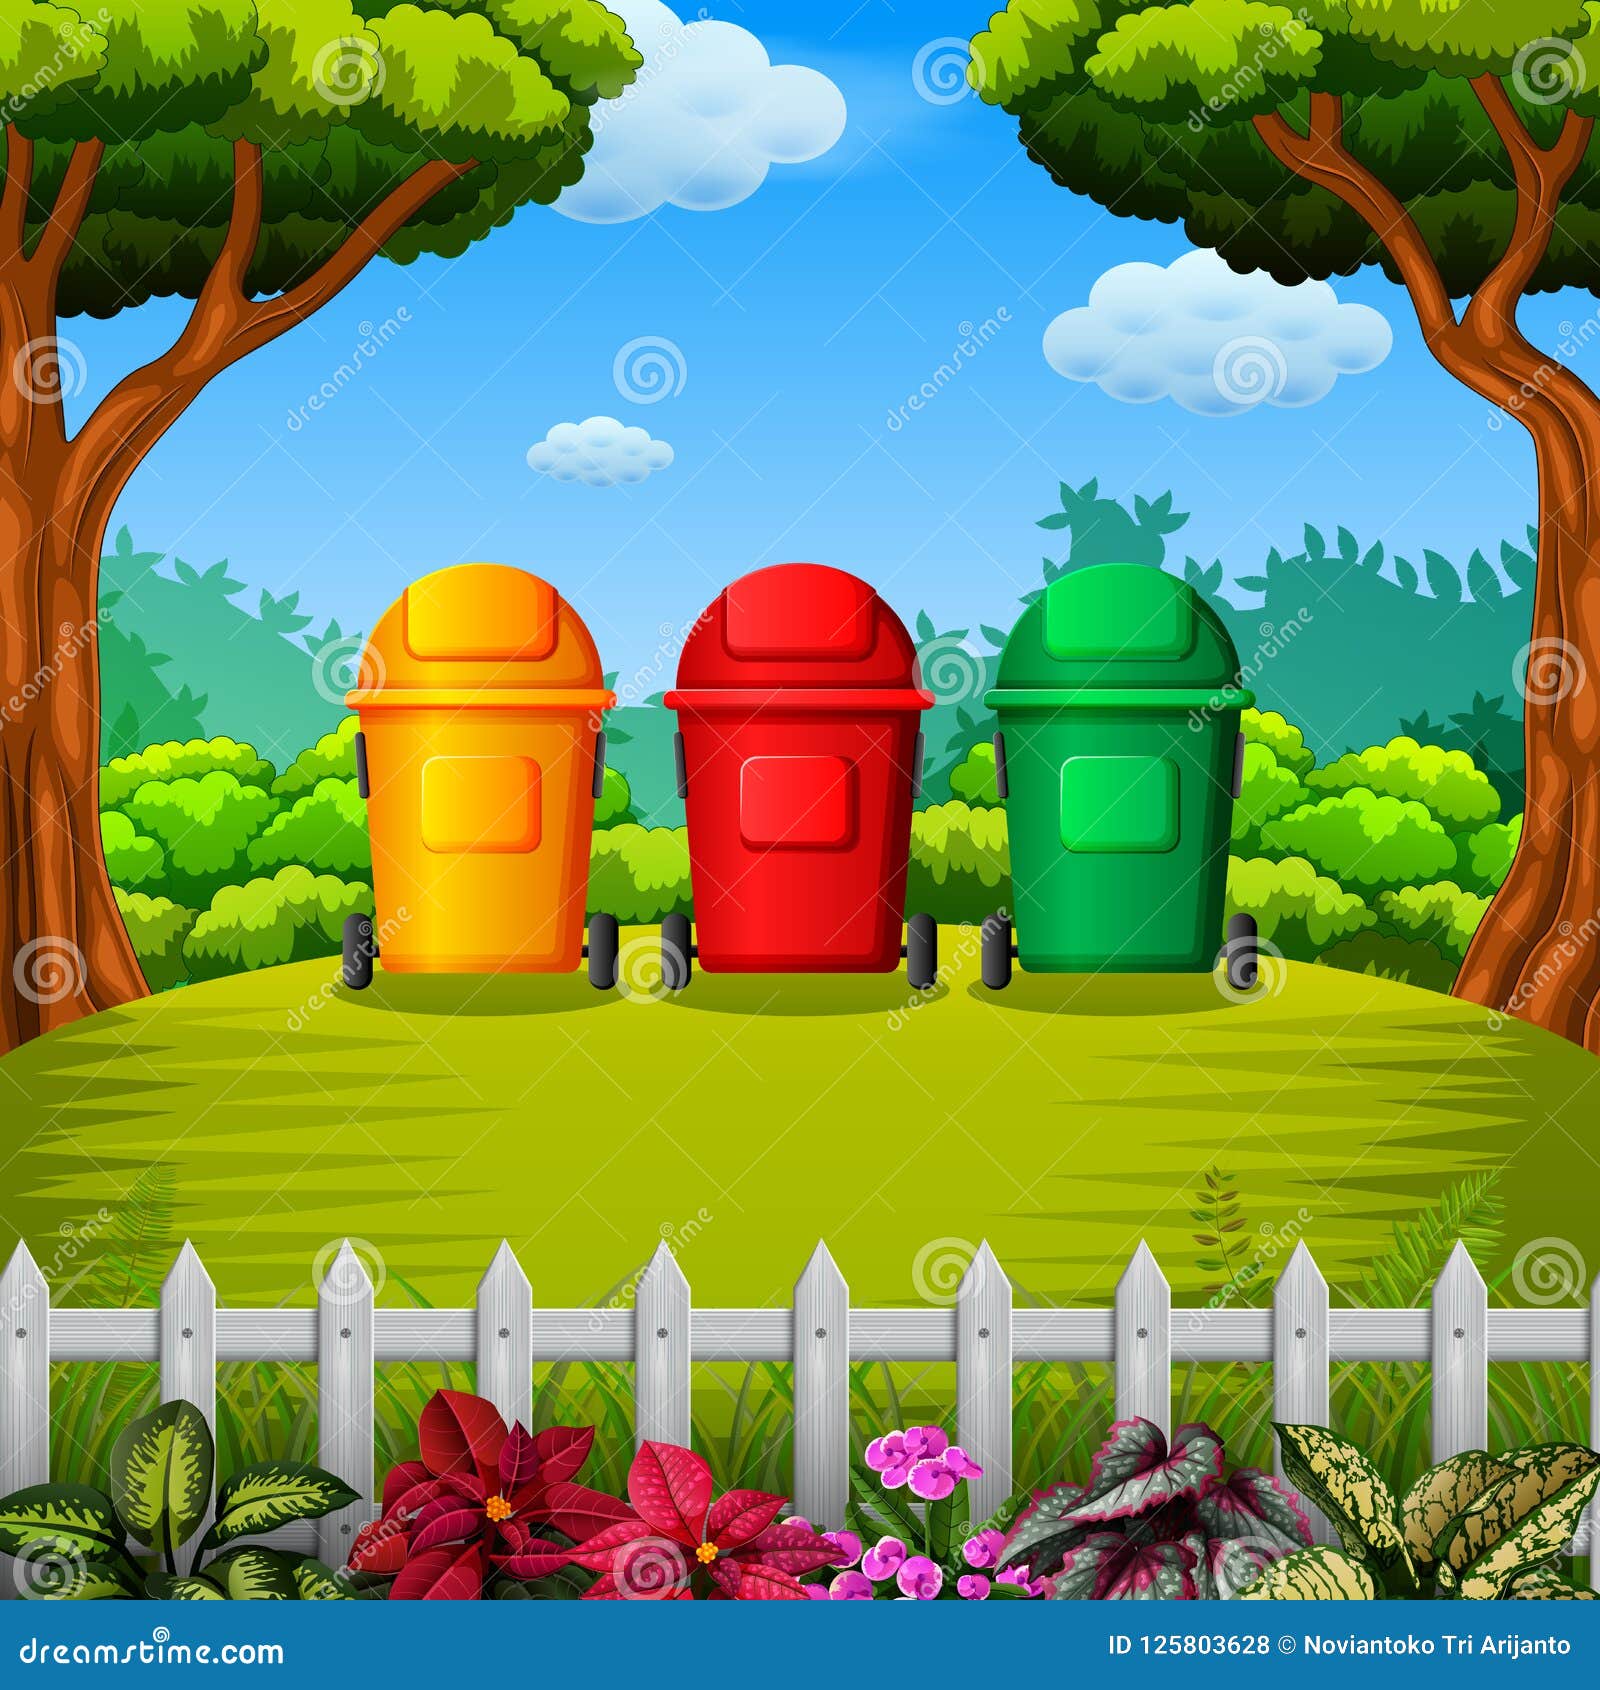 the colorfull trashbin with the garden view